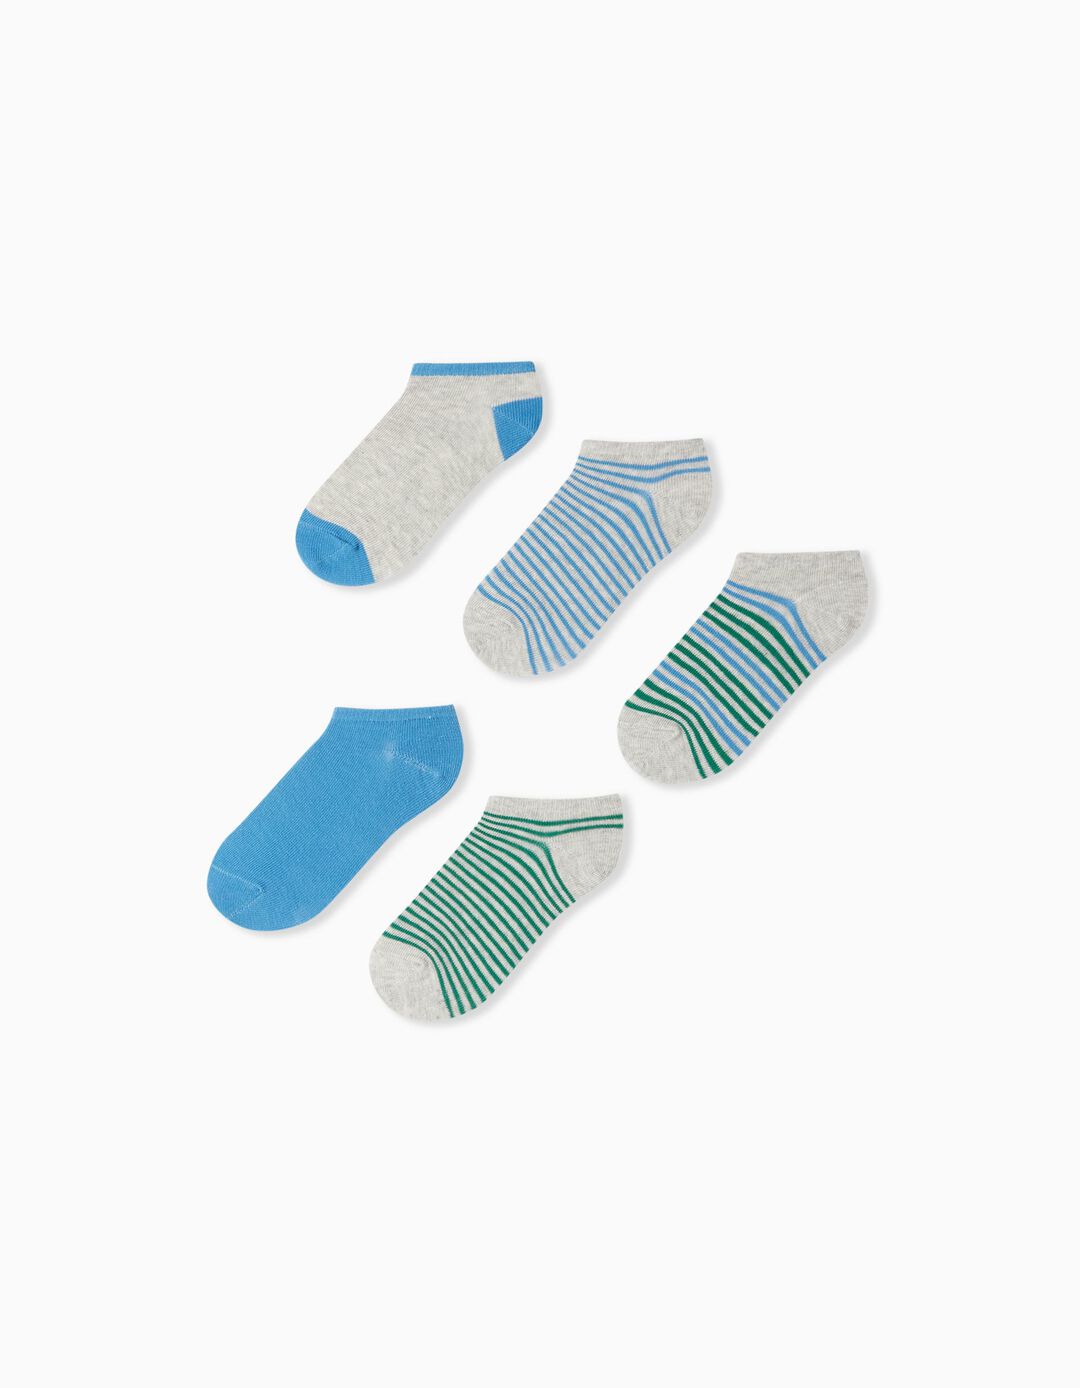 5 Pairs of Invisible Socks Pack, Boys, Multicolour